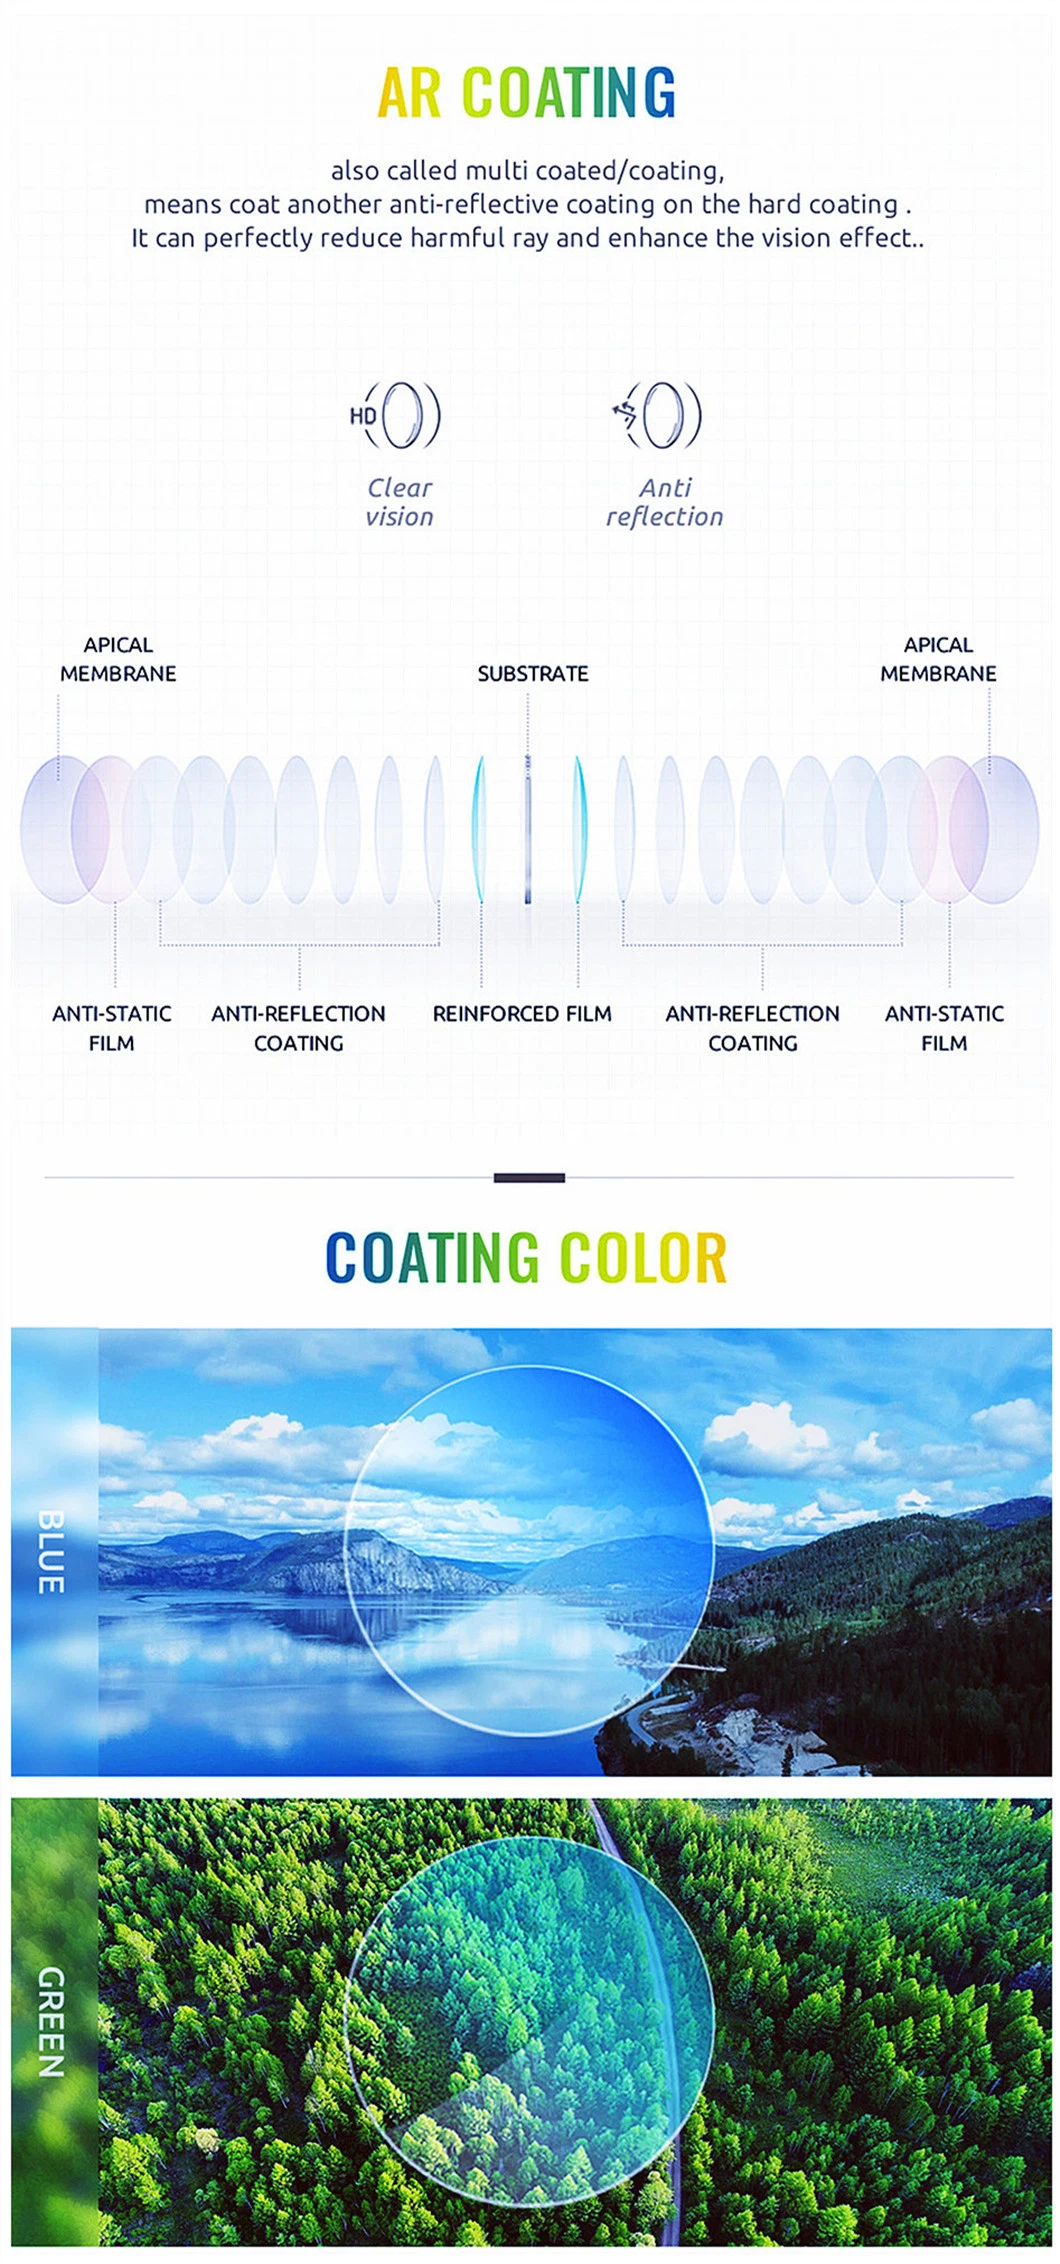 Optical Lens Suppliers 1.59 Spin Polycarbonate Photochromic Hmc Lens Spectacle Lenses Manufacturers